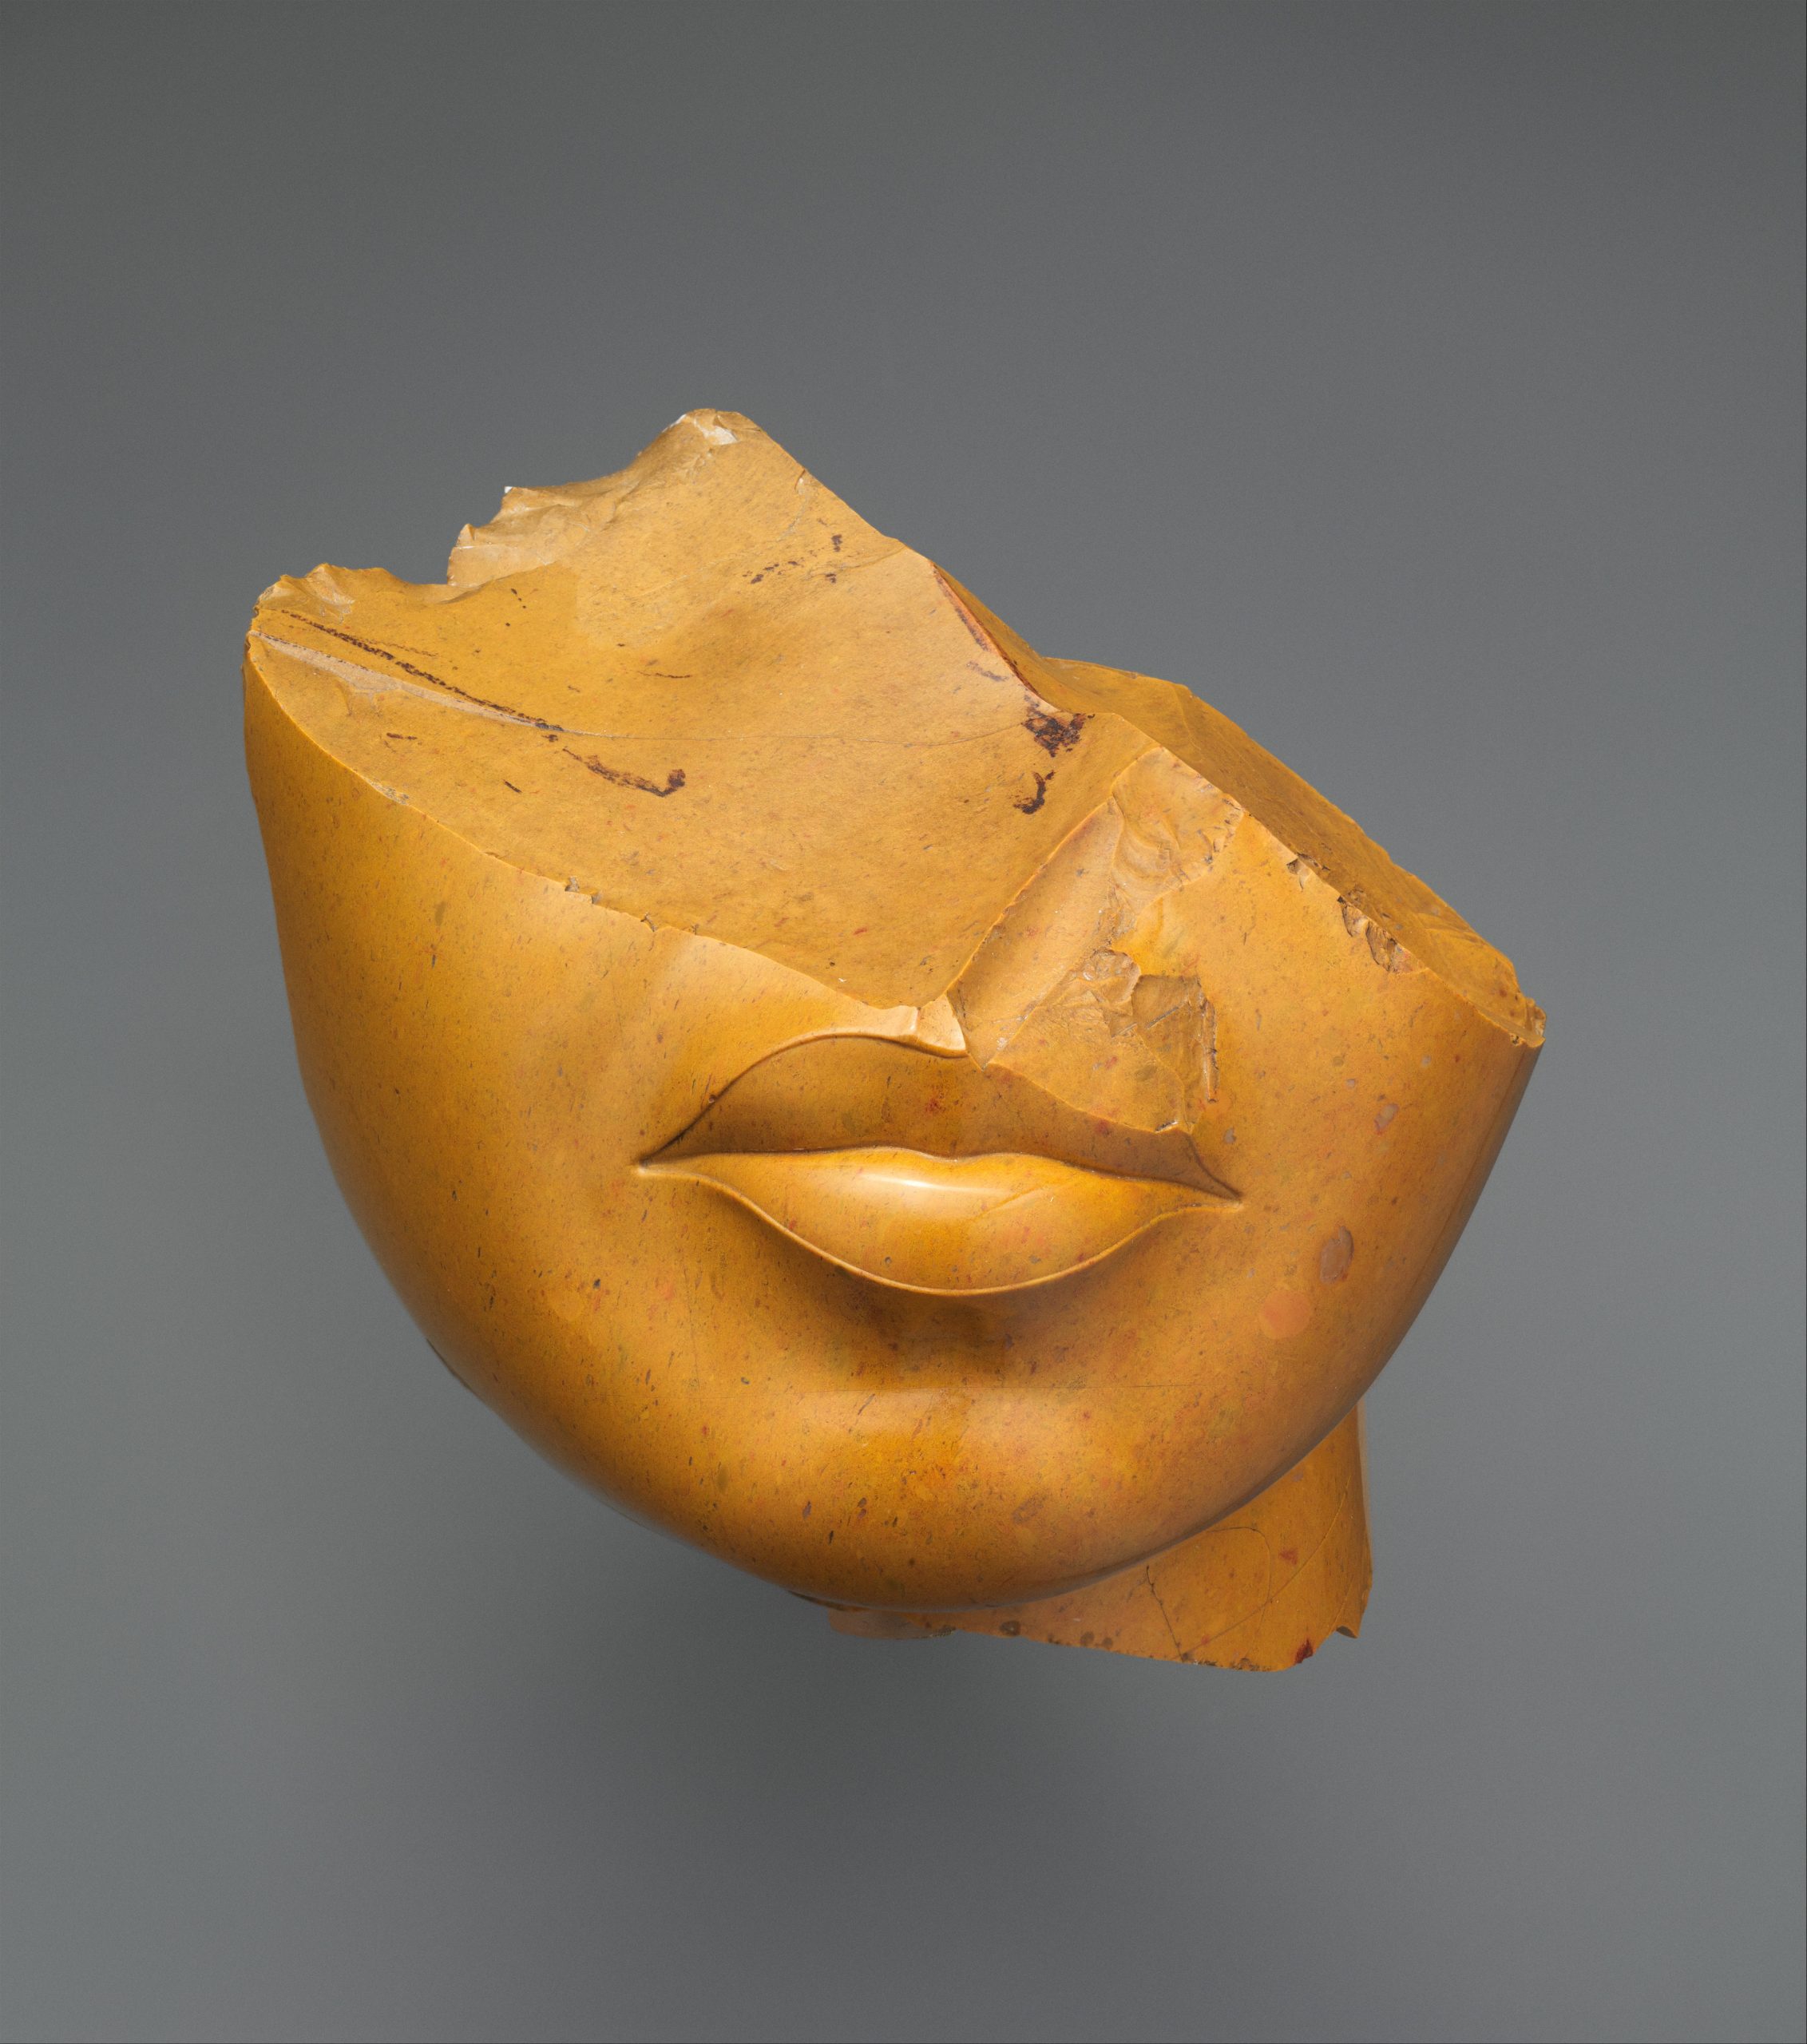 The image depicts a fragment of a statue of a Queen within the Amenhotep III or Akhenaten reign or the mid Dynasty 18. The fragment is a partial piece showing the lower half of a feminine face (i.e., the chin, lips, neck, and parts of the cranium). The medium used is yellow jasper. The dimensions of this piece are h. 13 cm (5 1/8 in); w. 12.5 cm (4 15/16 in); d. 12.5 cm (4 15/16 in). The piece is housed within the Metropolitan Museum.